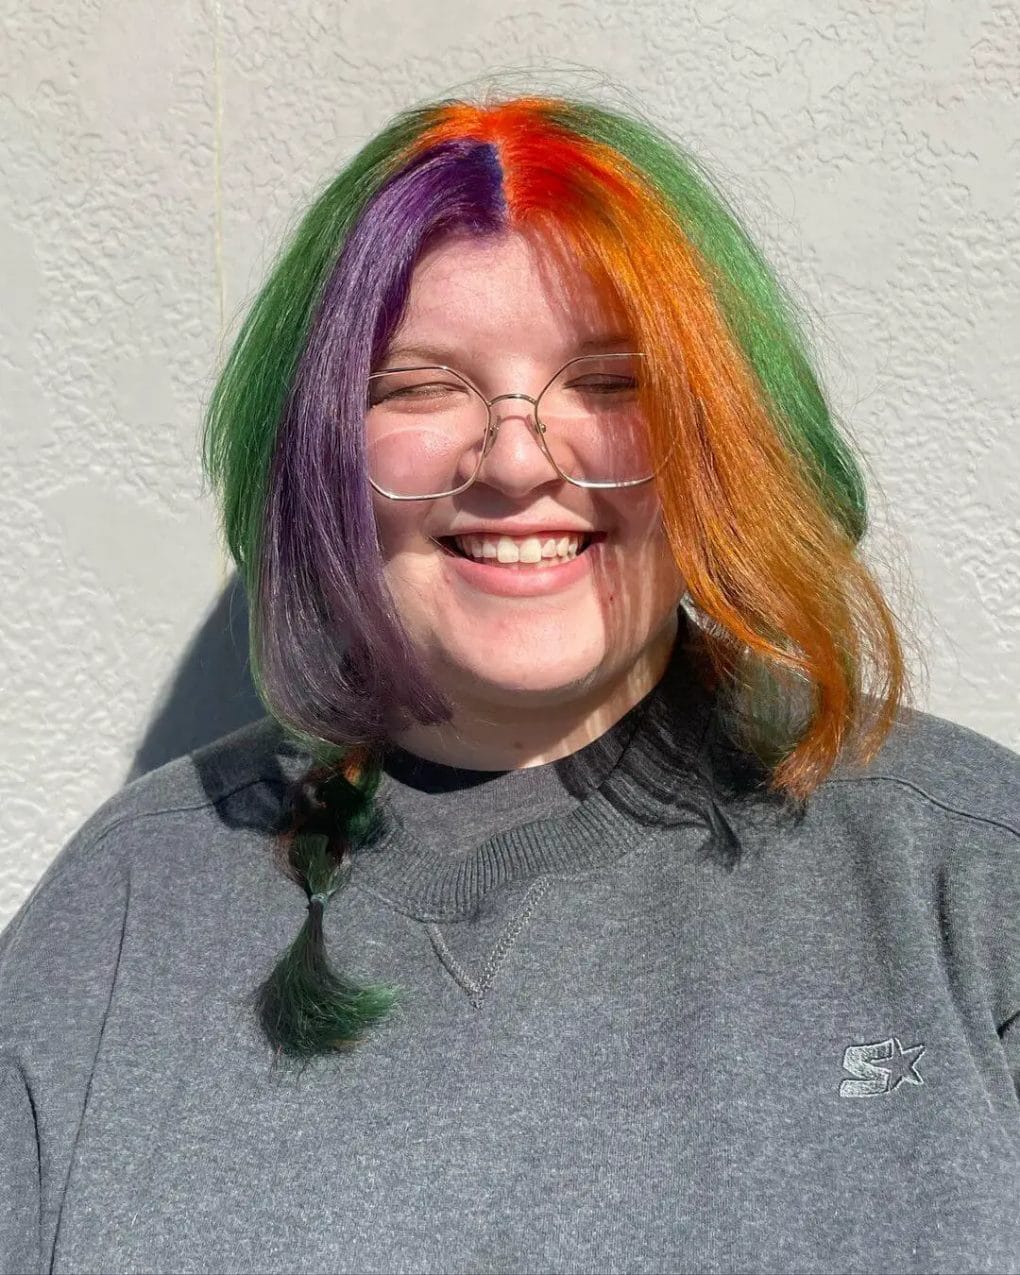 Playful multicolored jellyfish haircut with a mix of orange, purple, and green hues and creative braids.